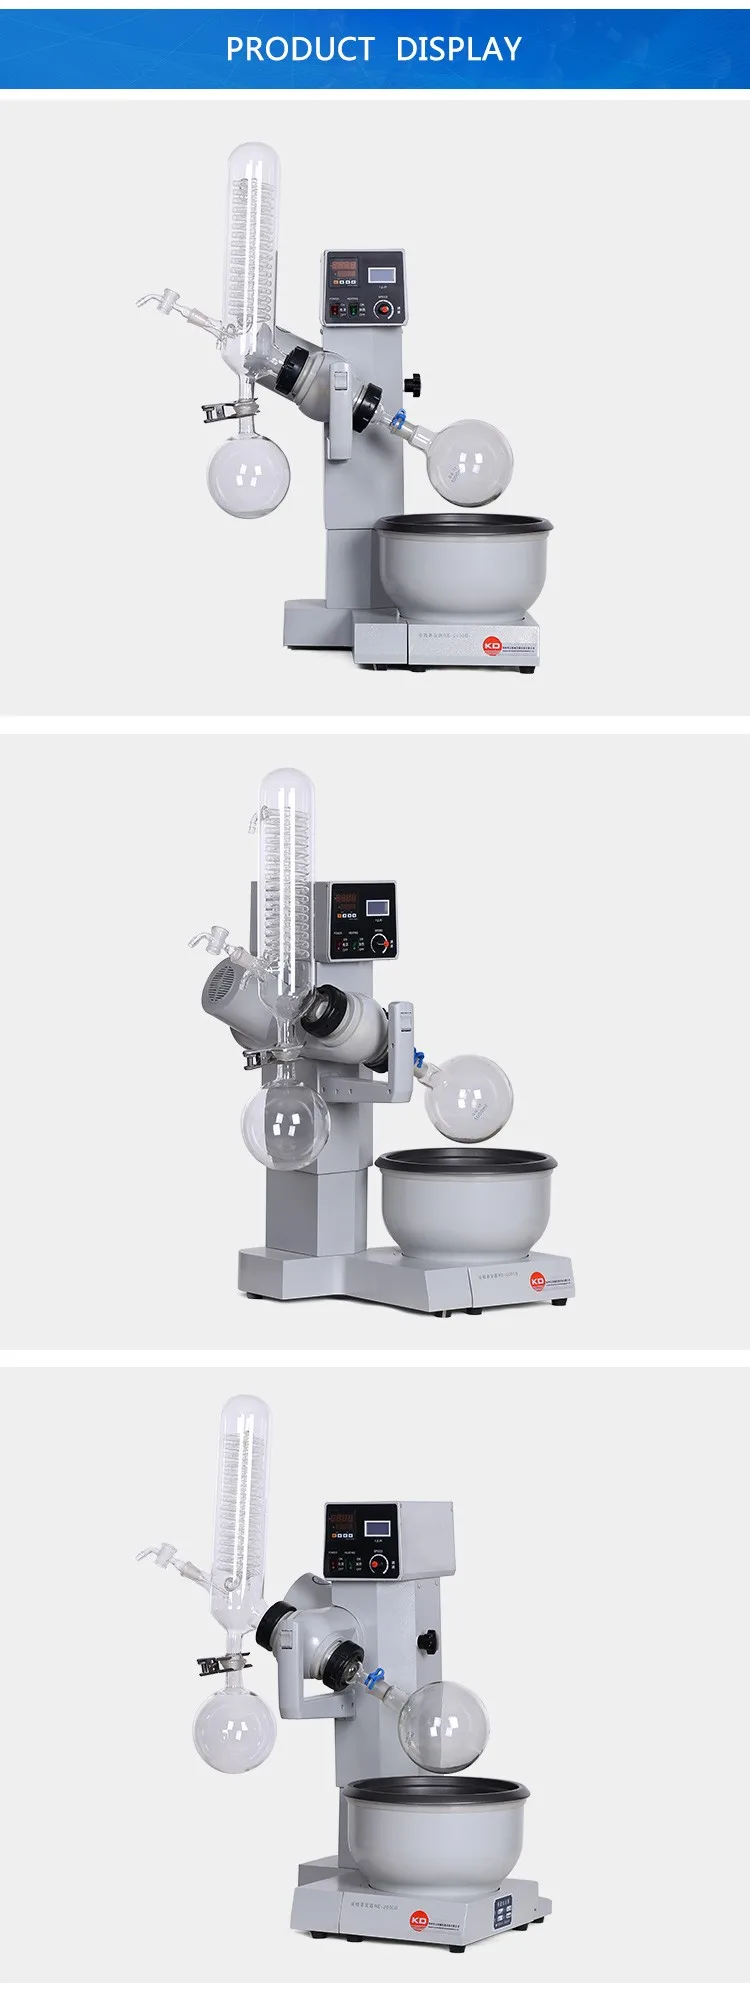 Hot Fractional Distillation Rotary Evaporator in the Lab